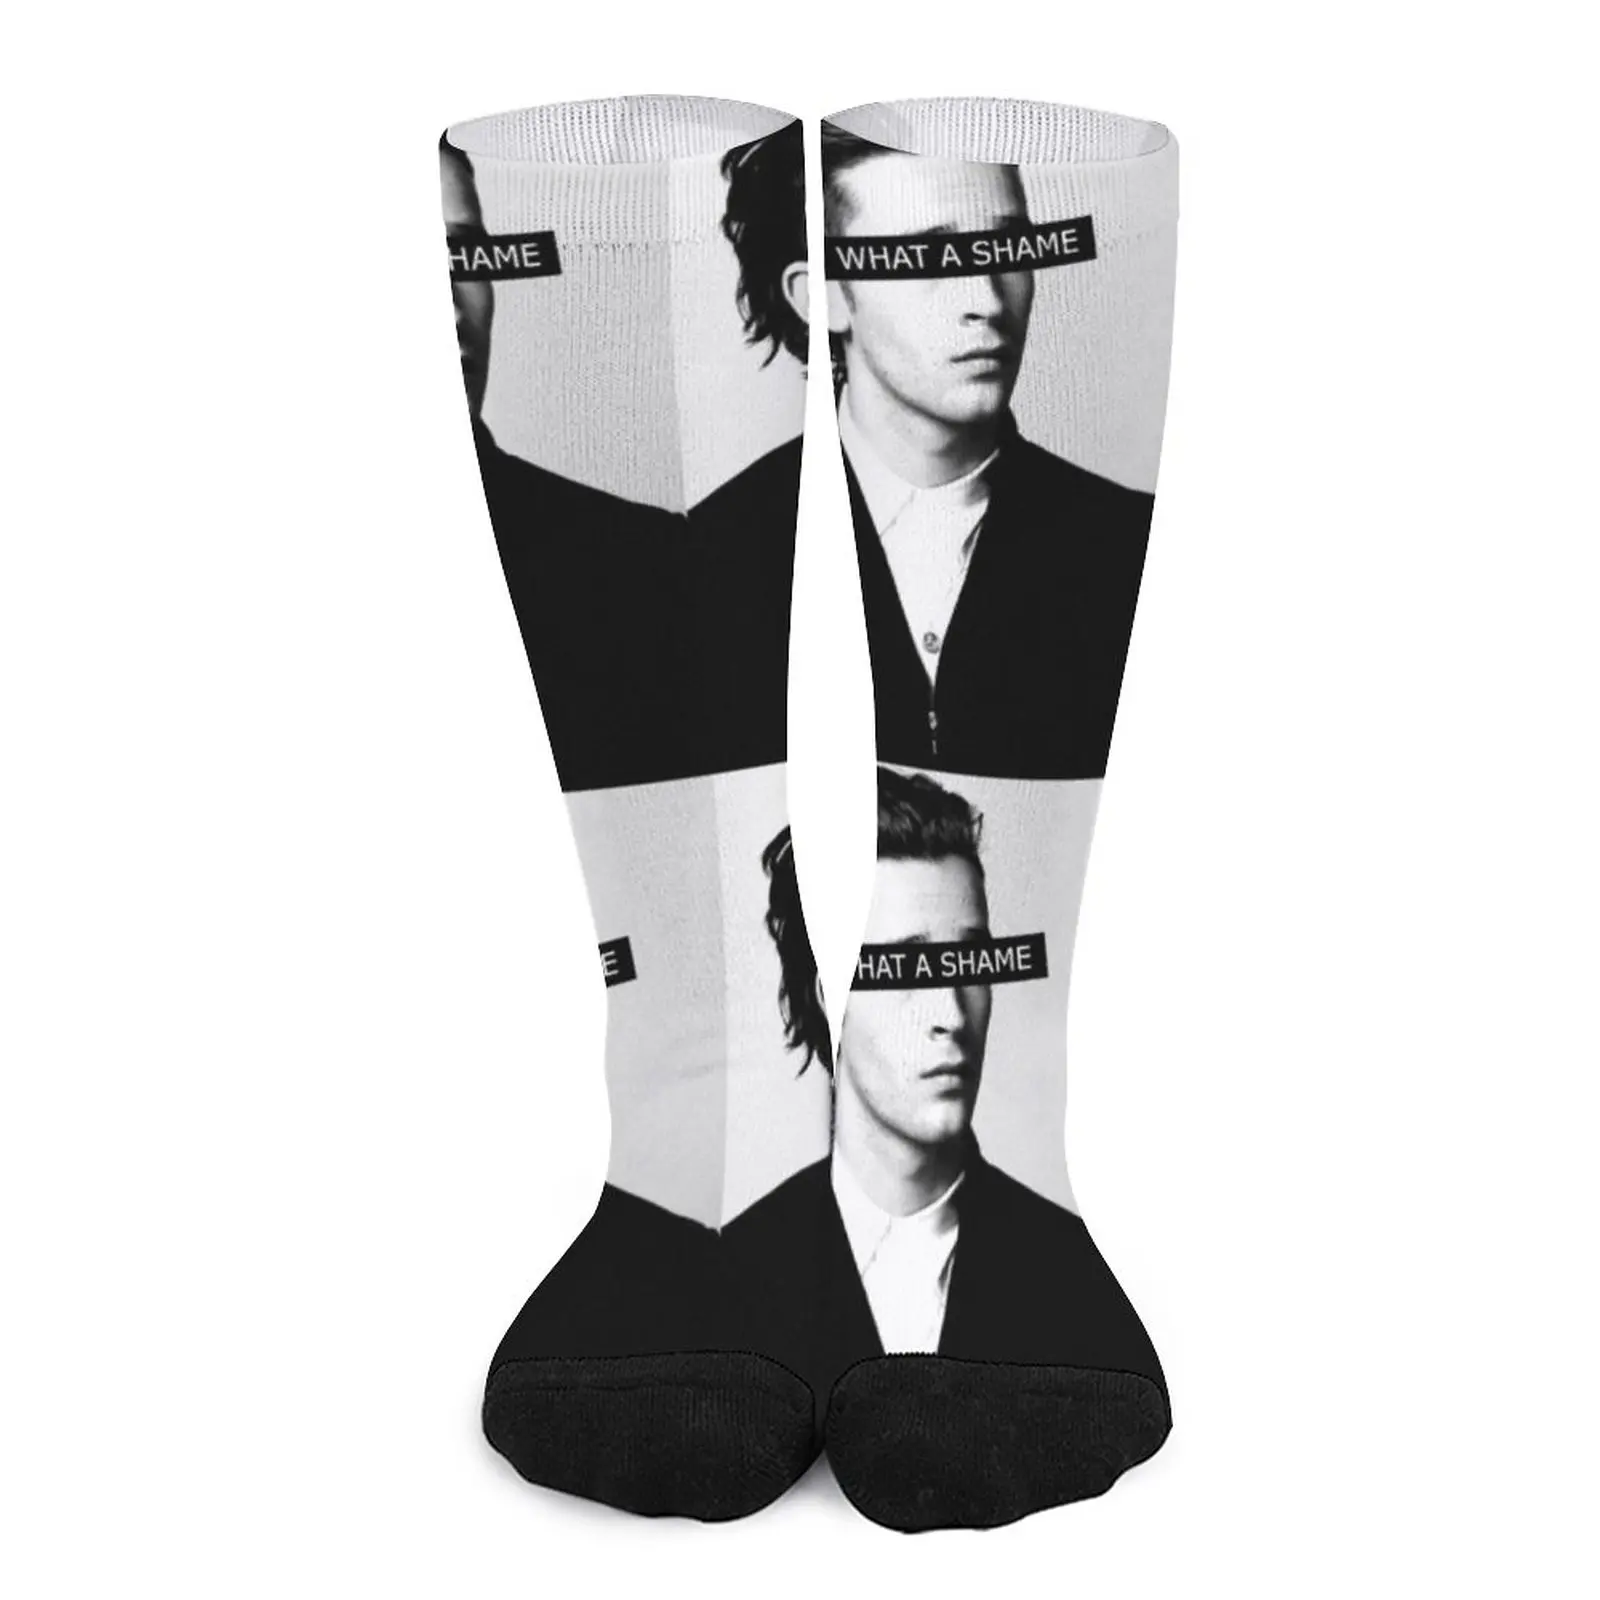 WHAT A SHAME - Matty Healy of The 1975 Socks happy socks Wholesale highway 9 what in samhill 1 cd